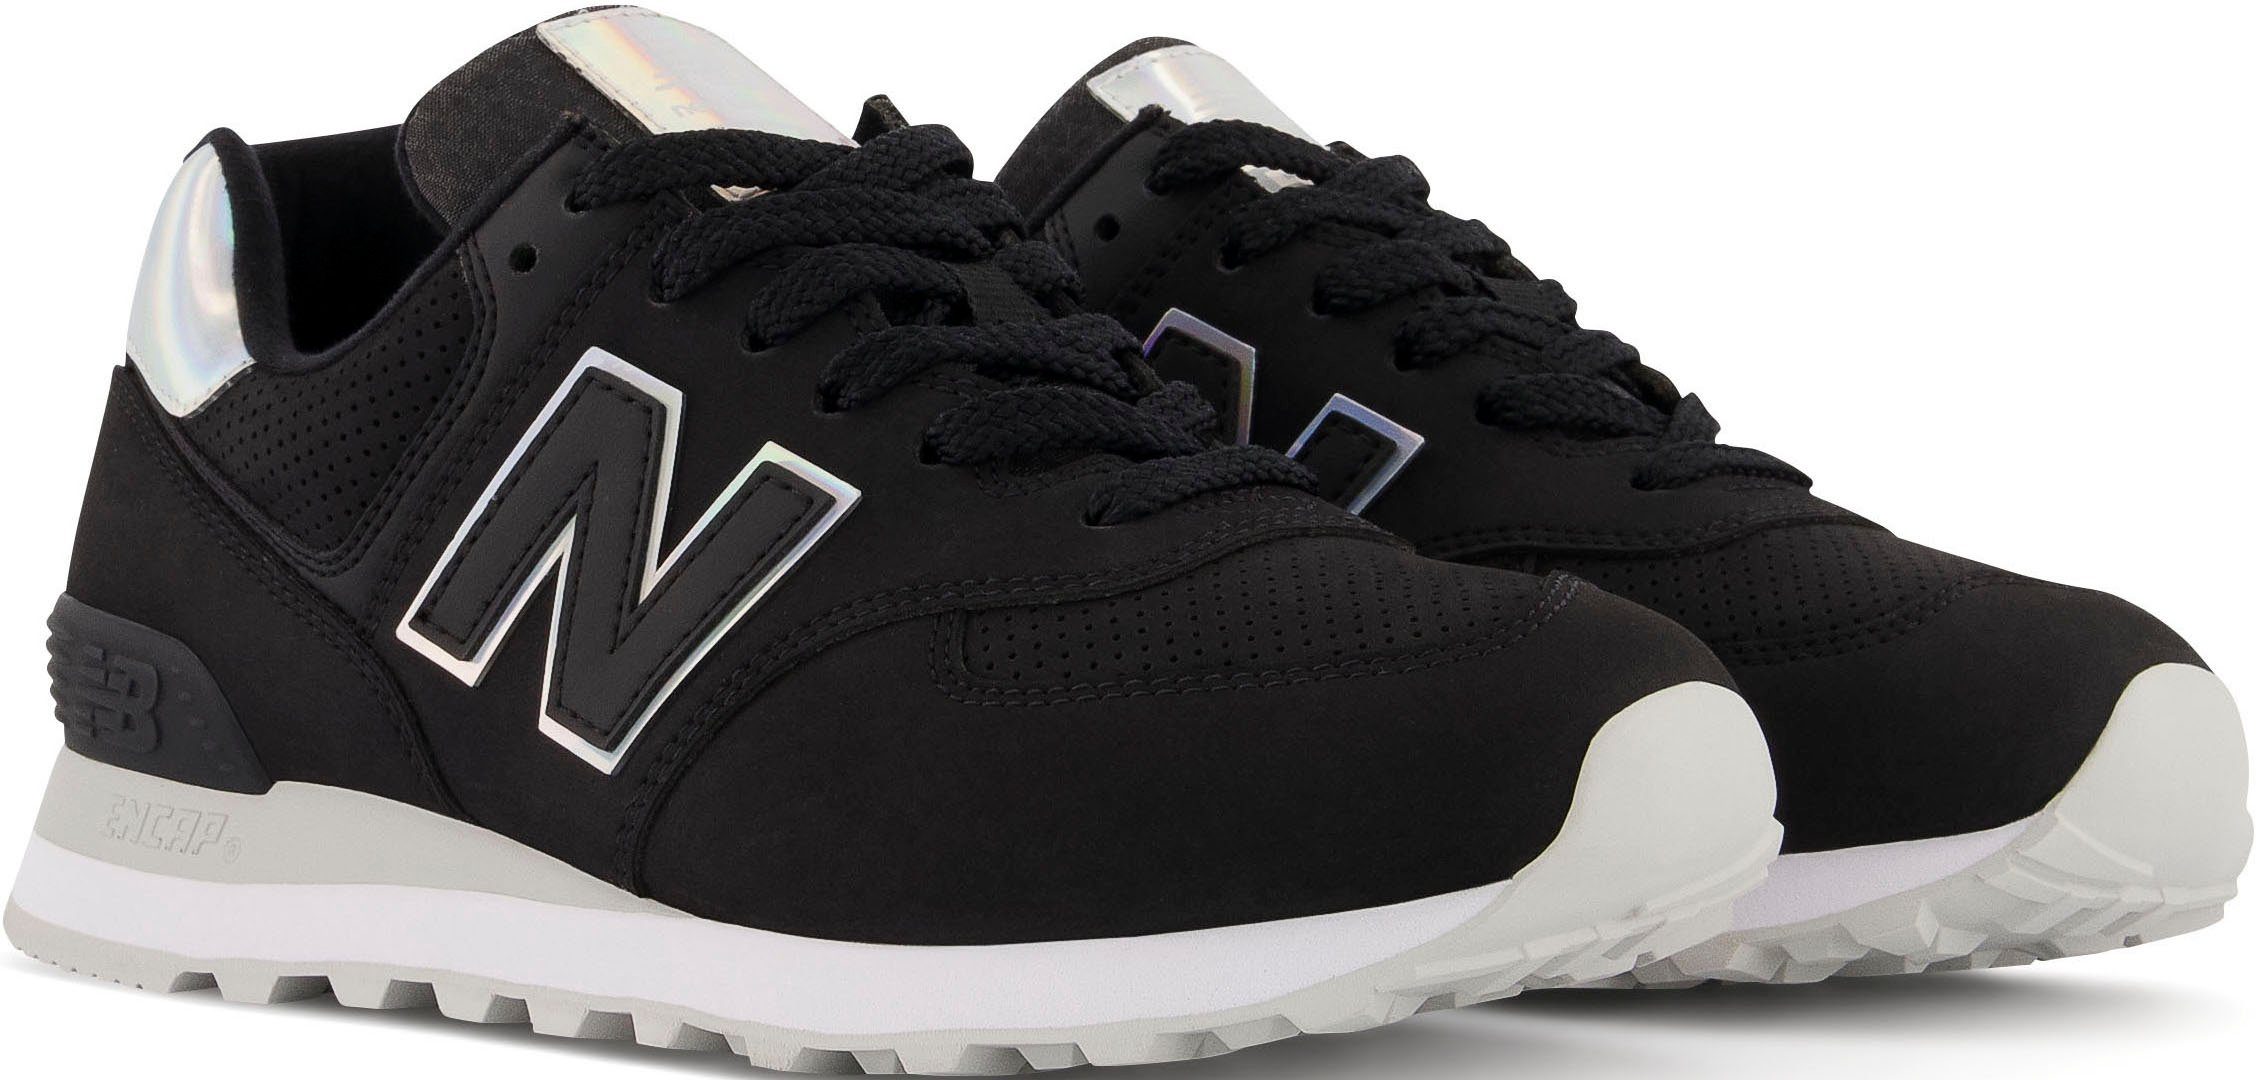 New Balance »WL574 "Shimmery Pack"« Sneaker kaufen | OTTO